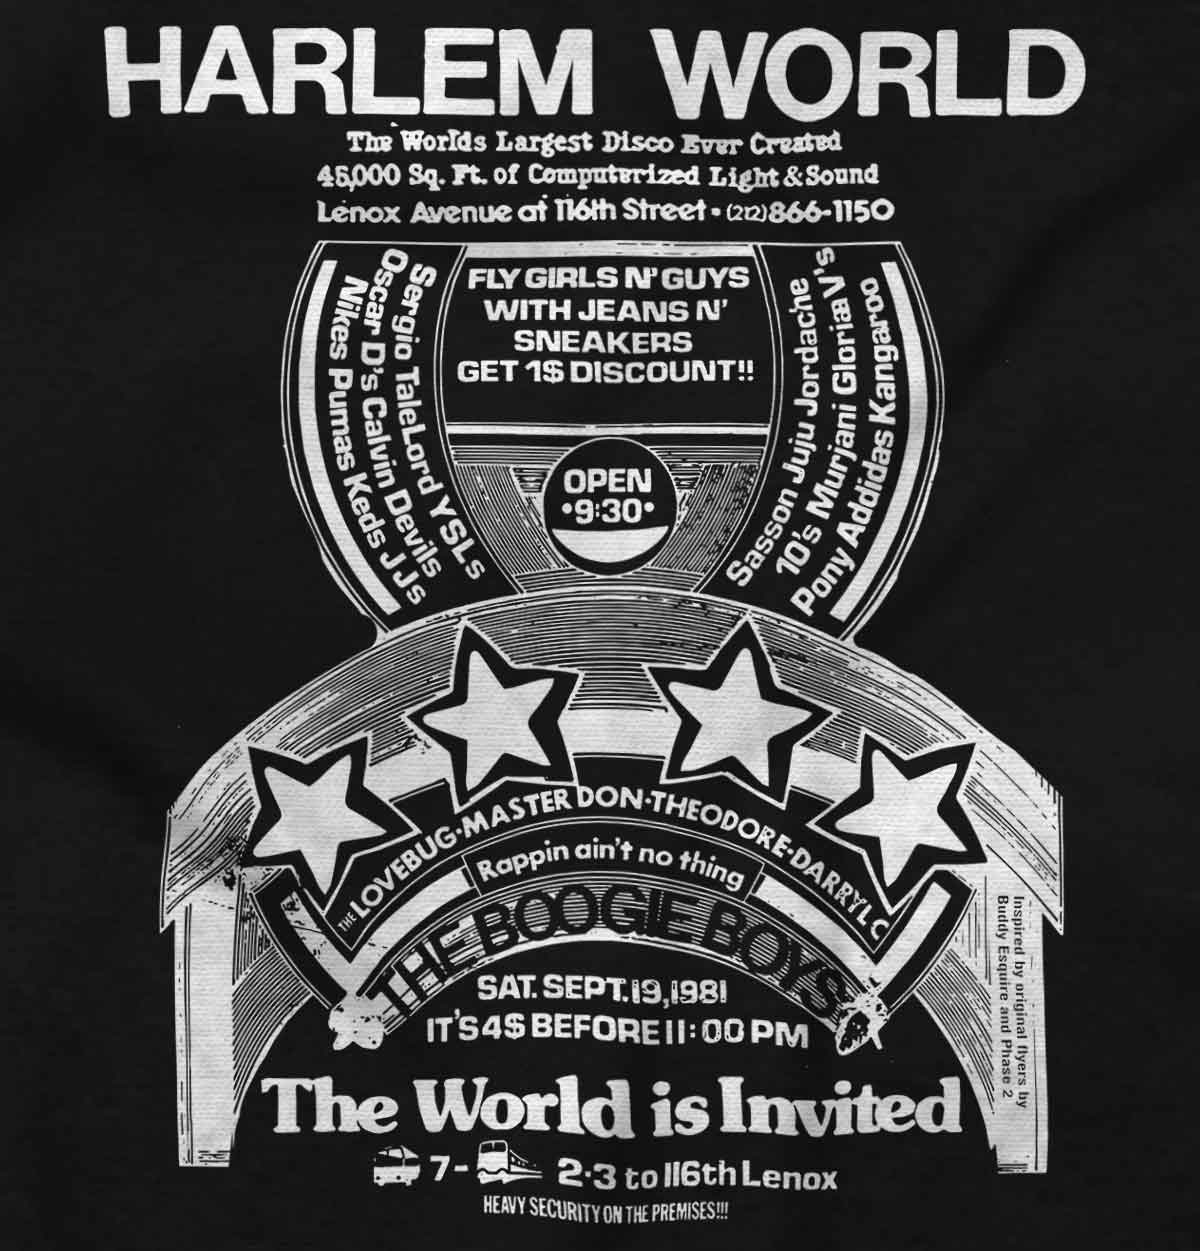 A black-and-white graphic showing the influence of rap's golden era in Harlem, the birthplace of hip-hop.